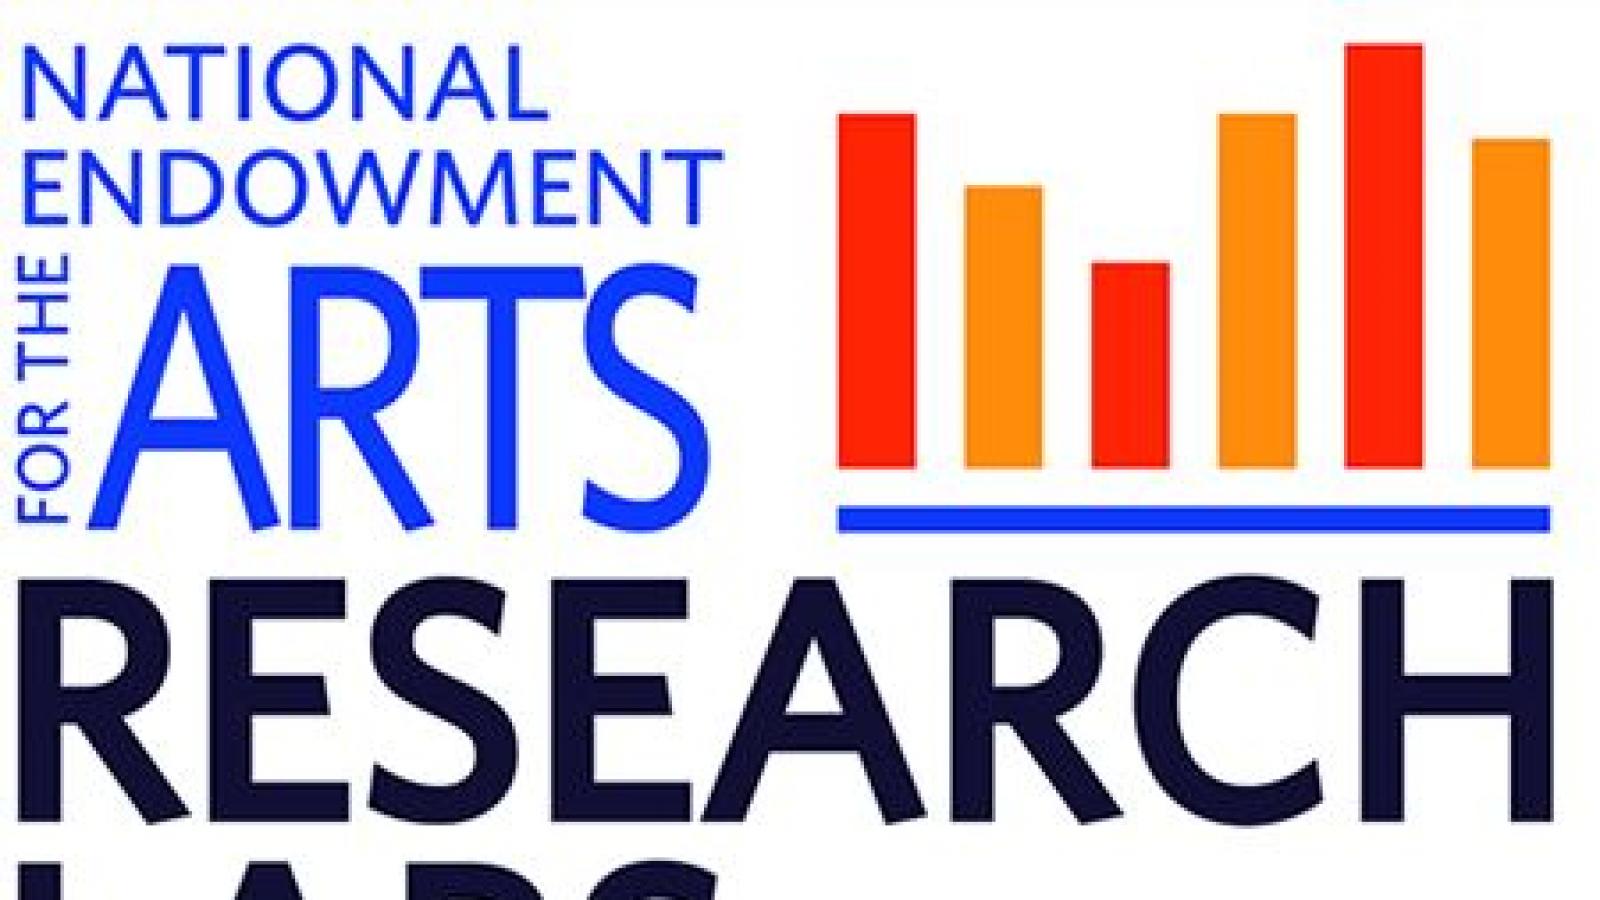 Logo of NEA Research Labs